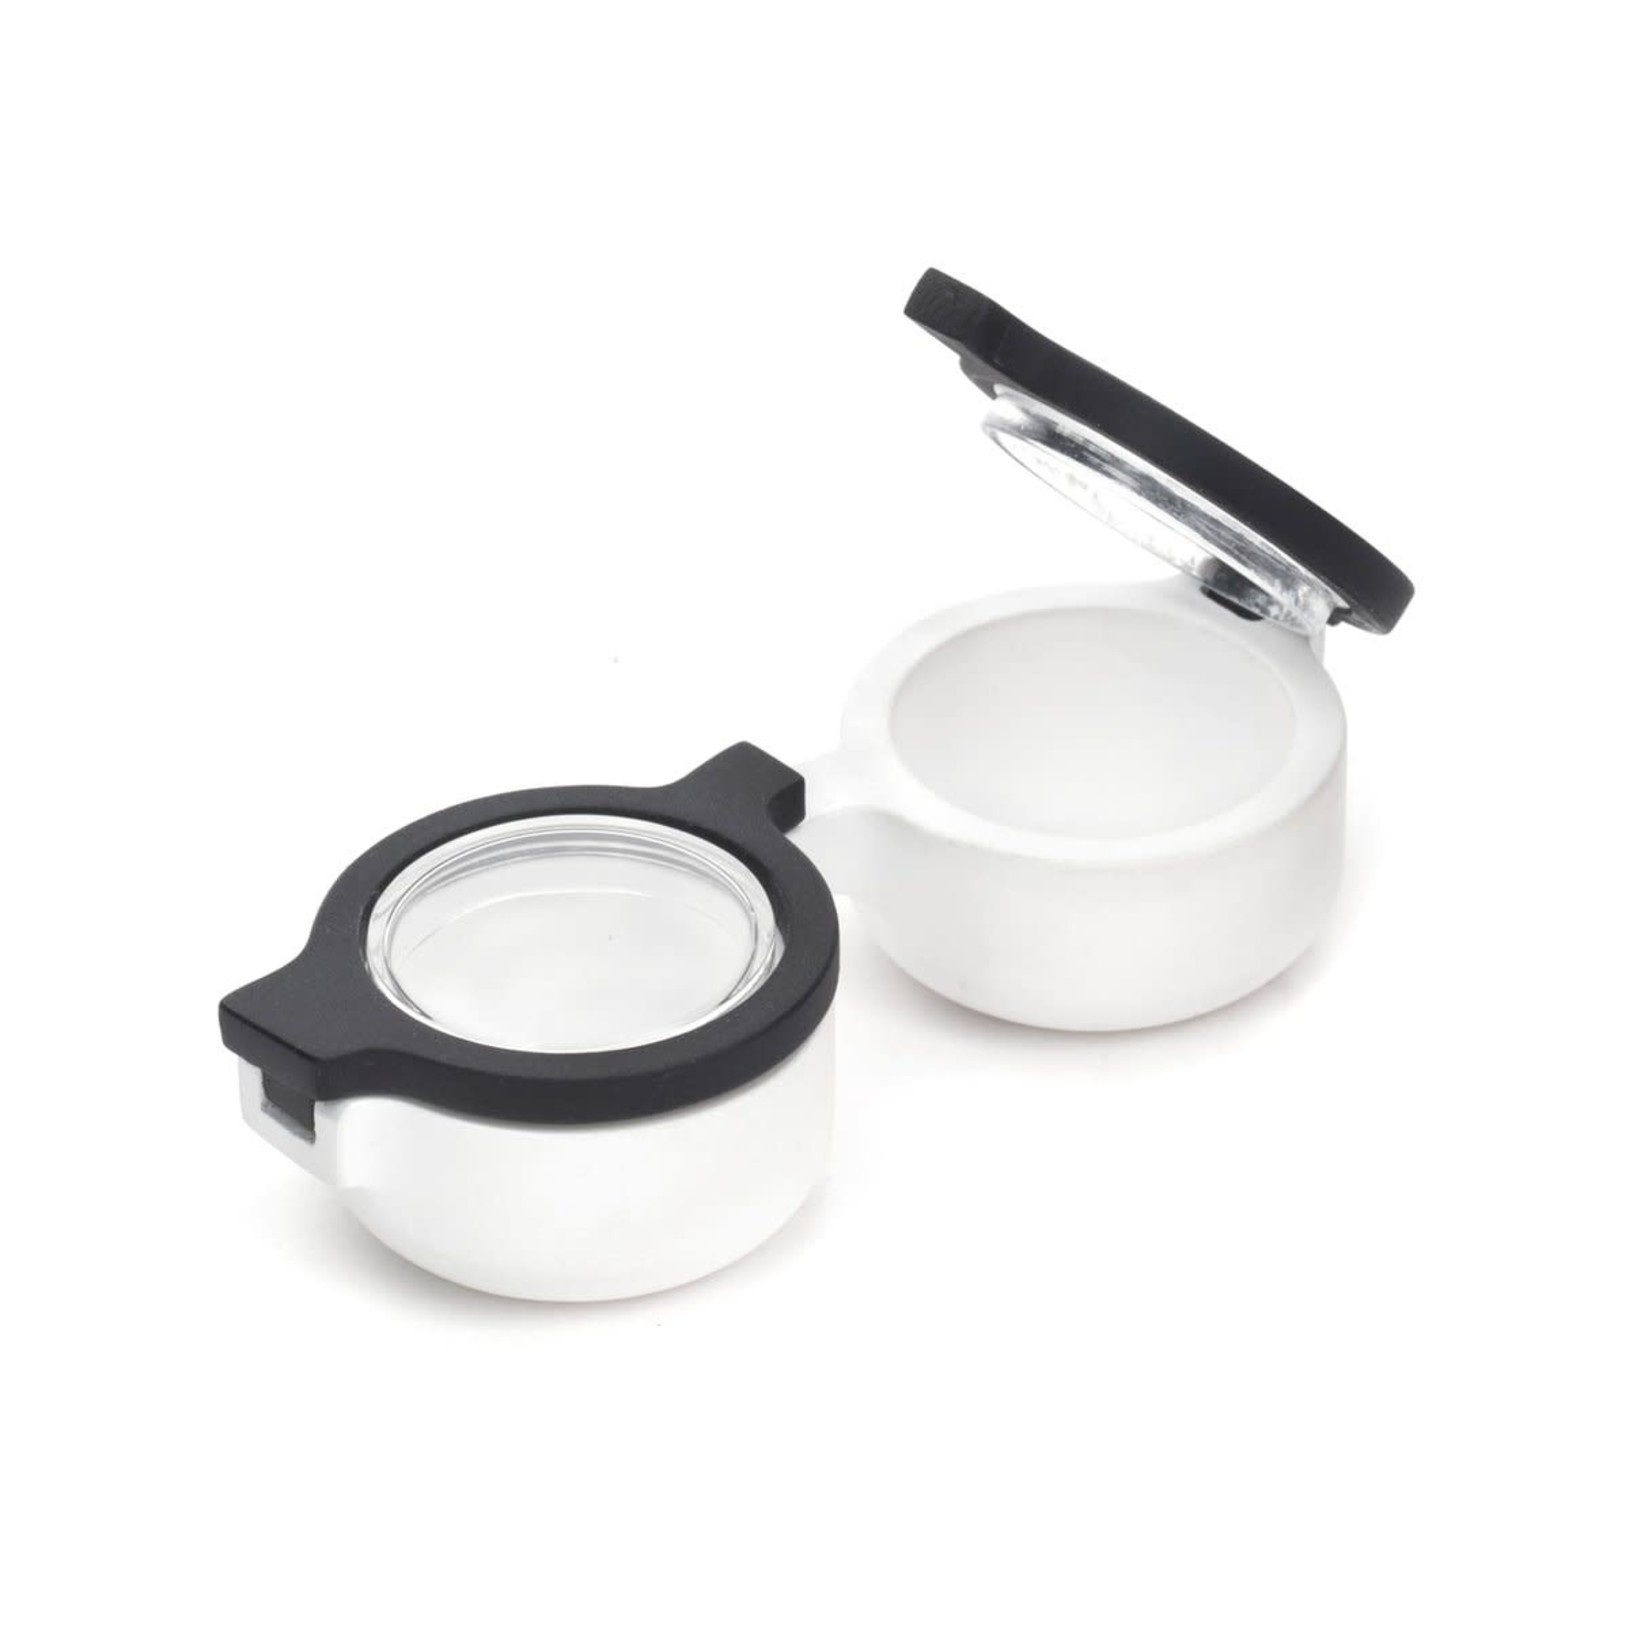 CONTACT LENS CASE - ROUND GLASSES